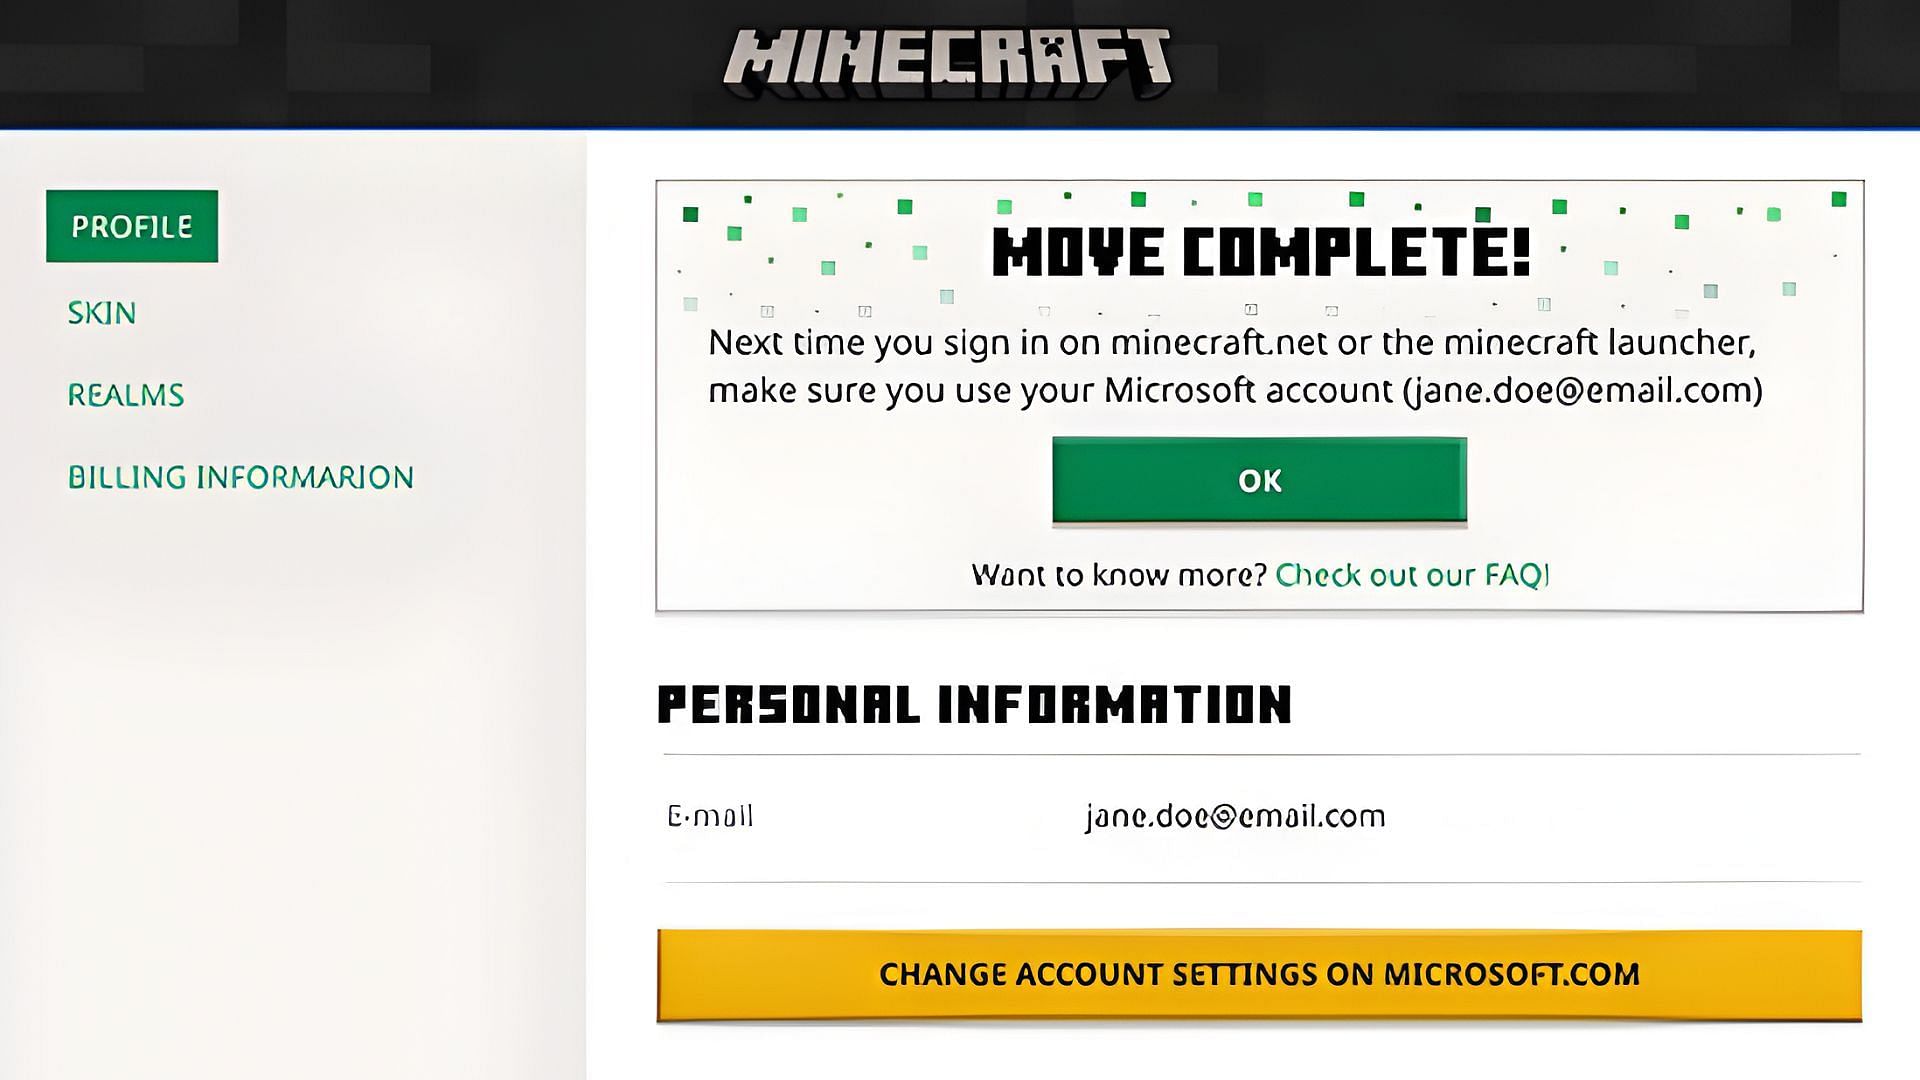 How to migrate your account in Minecraft